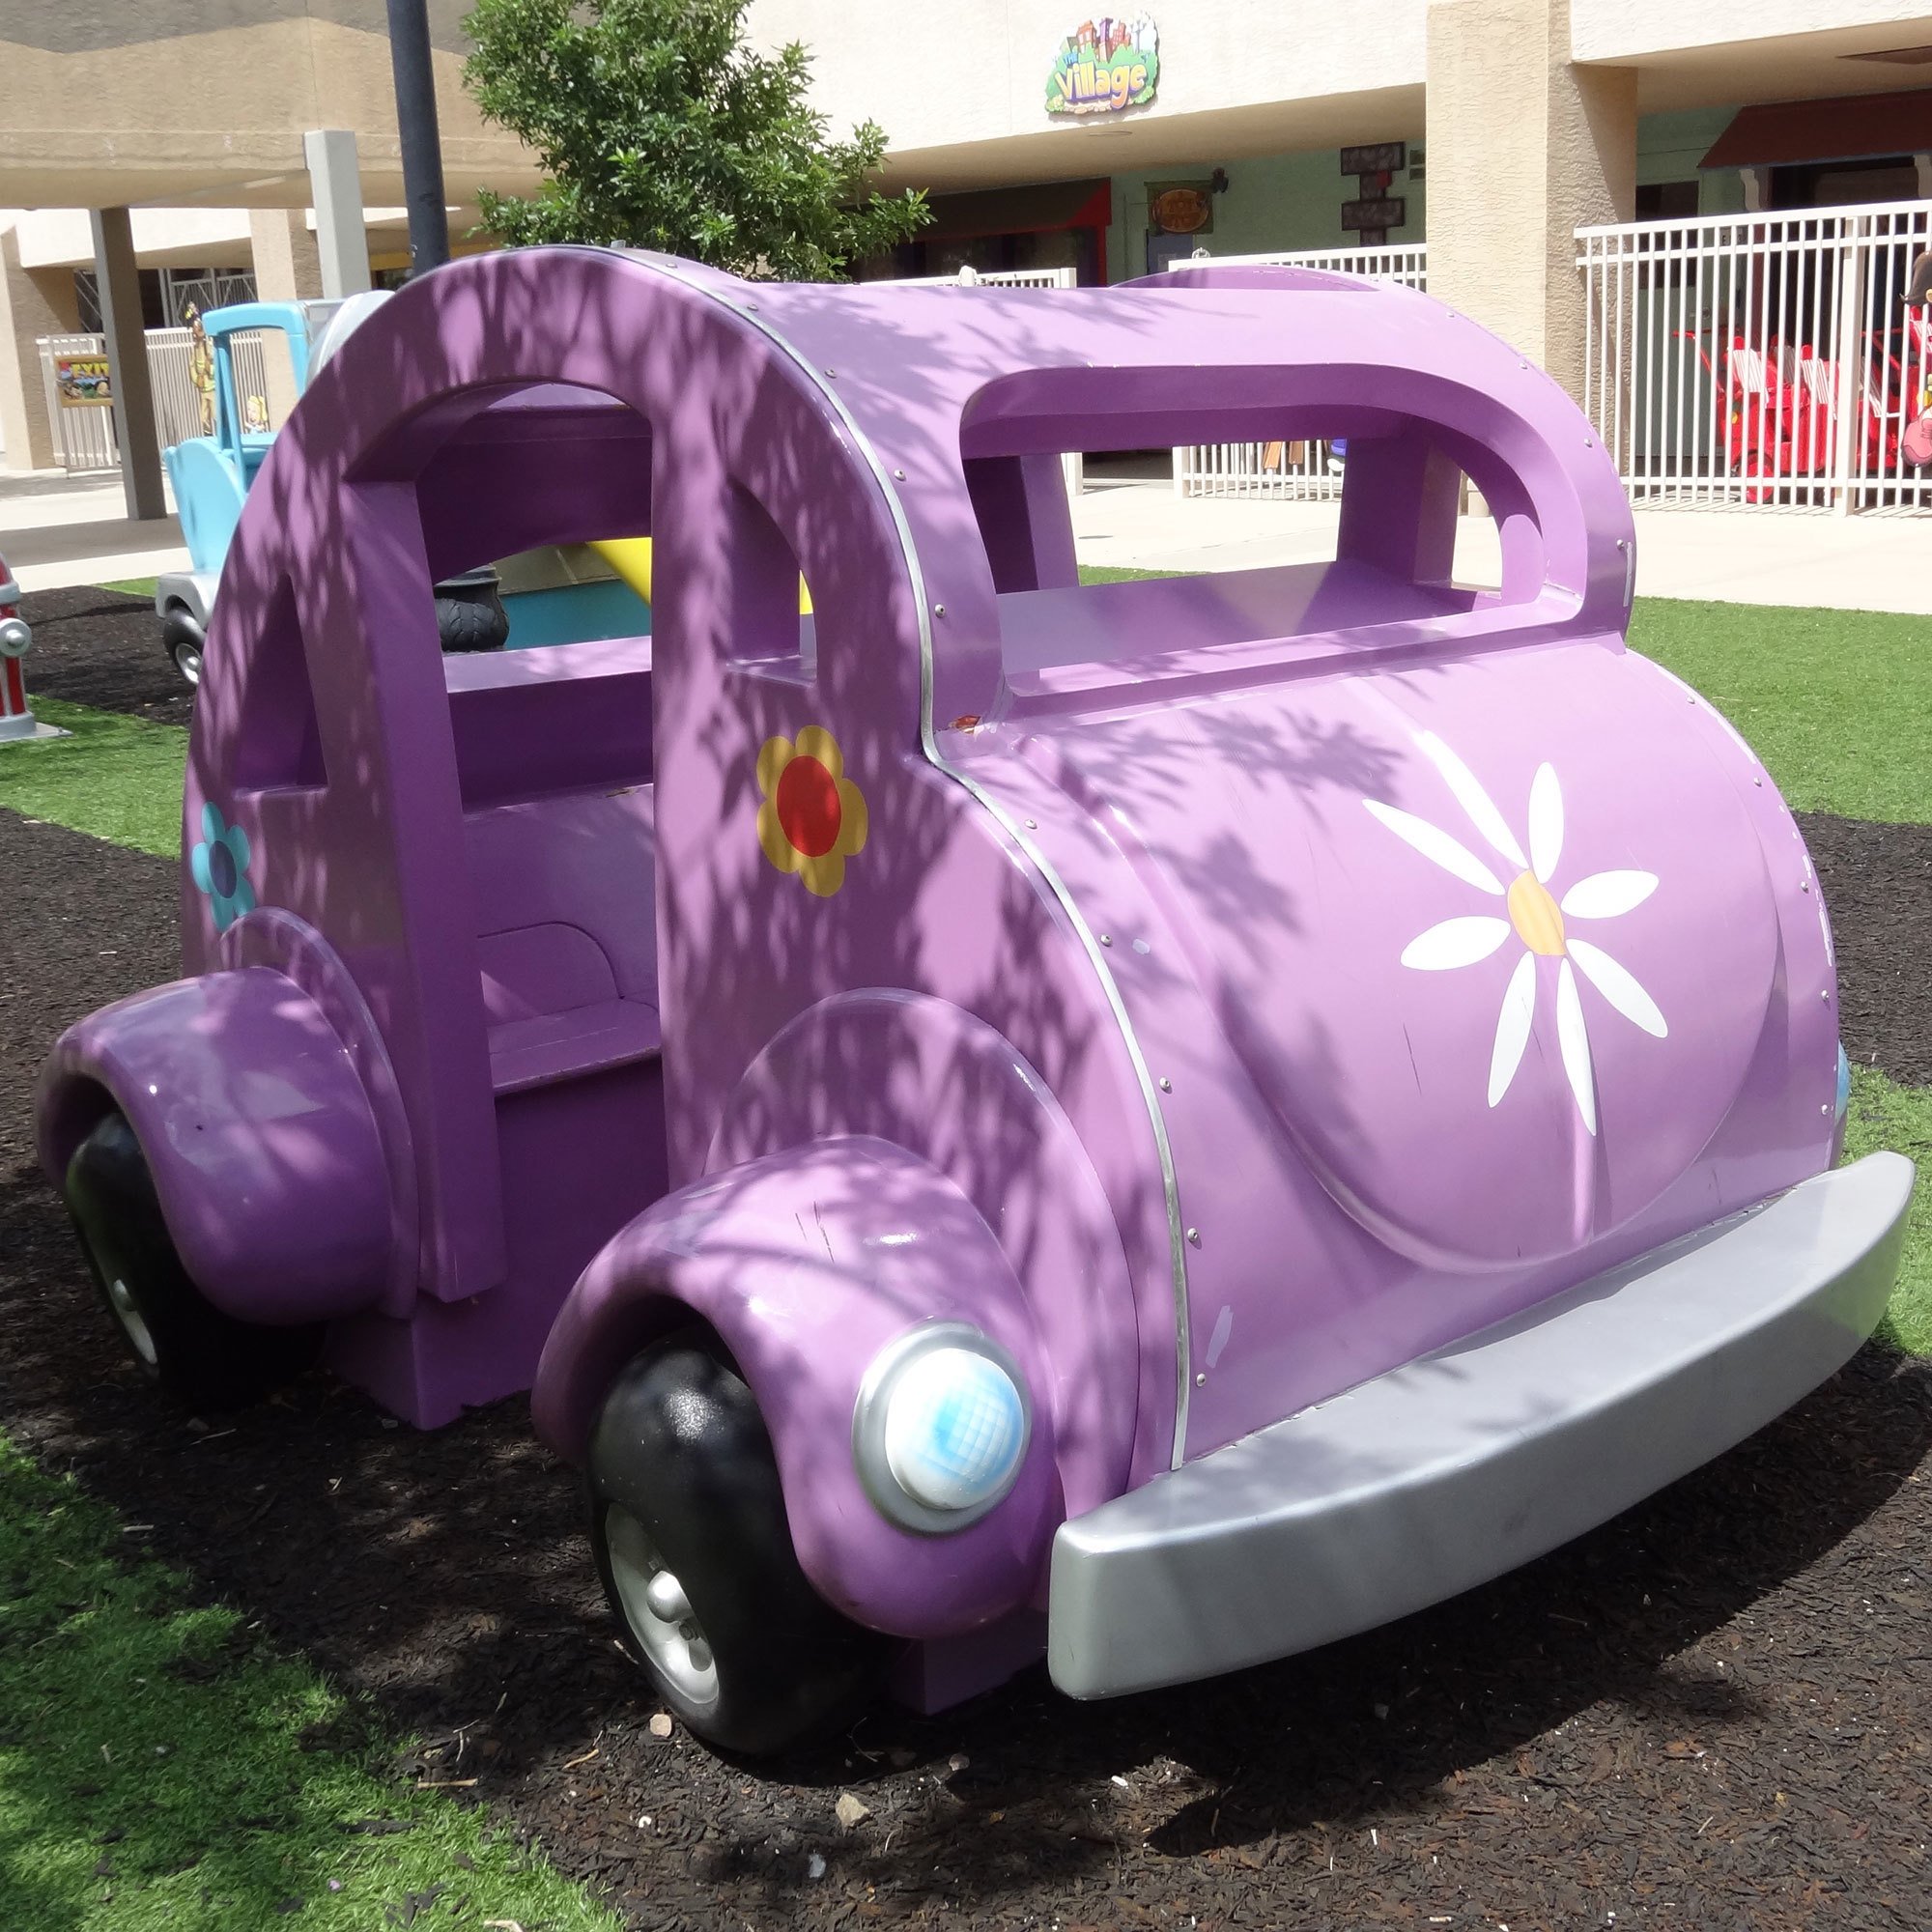 3D Lavender colored car parked outdoors in a Toon Town Car Play Area Themed Environment at Casas Church